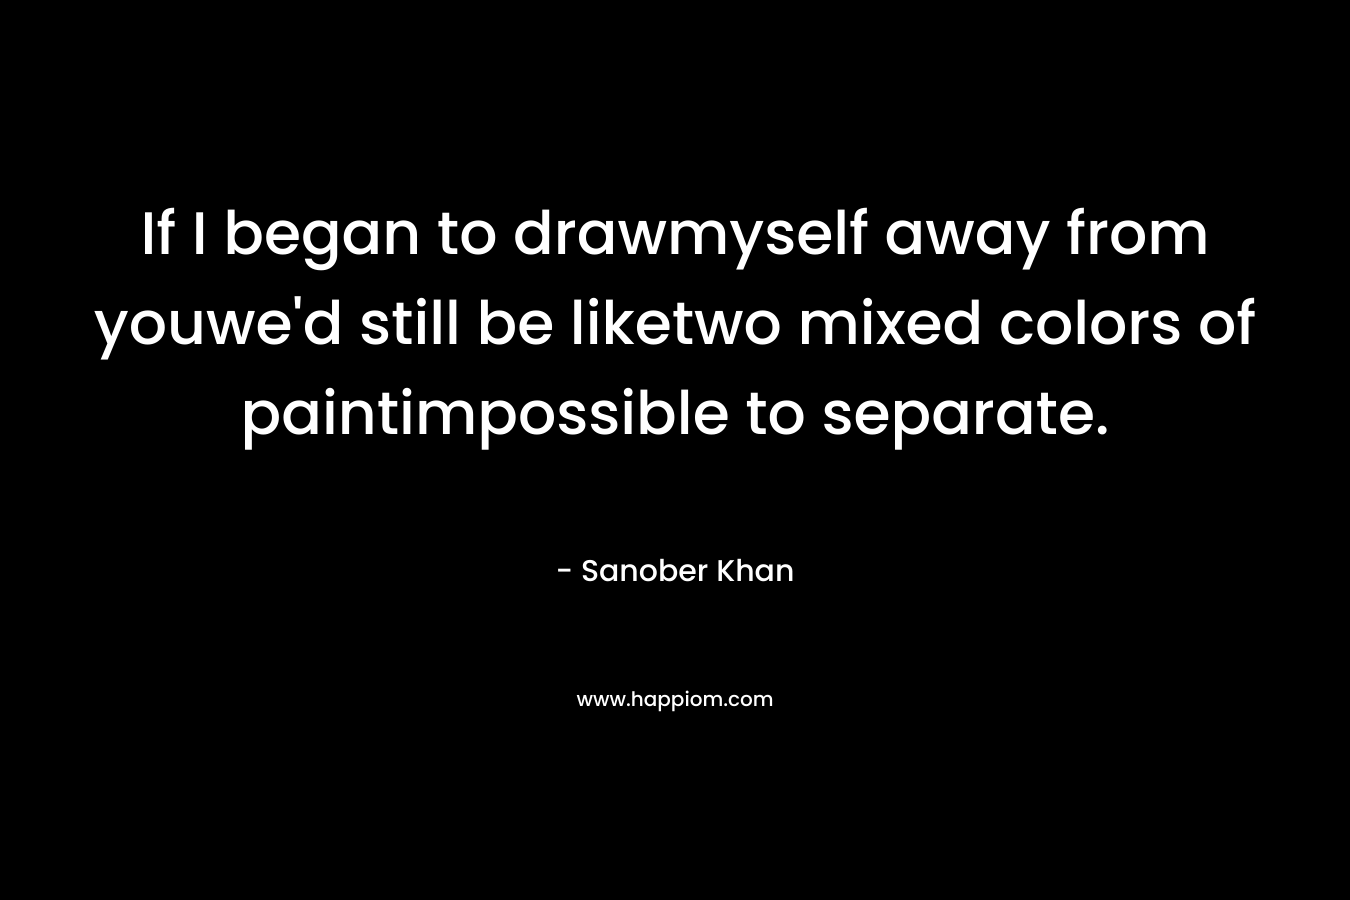 If I began to drawmyself away from youwe'd still be liketwo mixed colors of paintimpossible to separate.